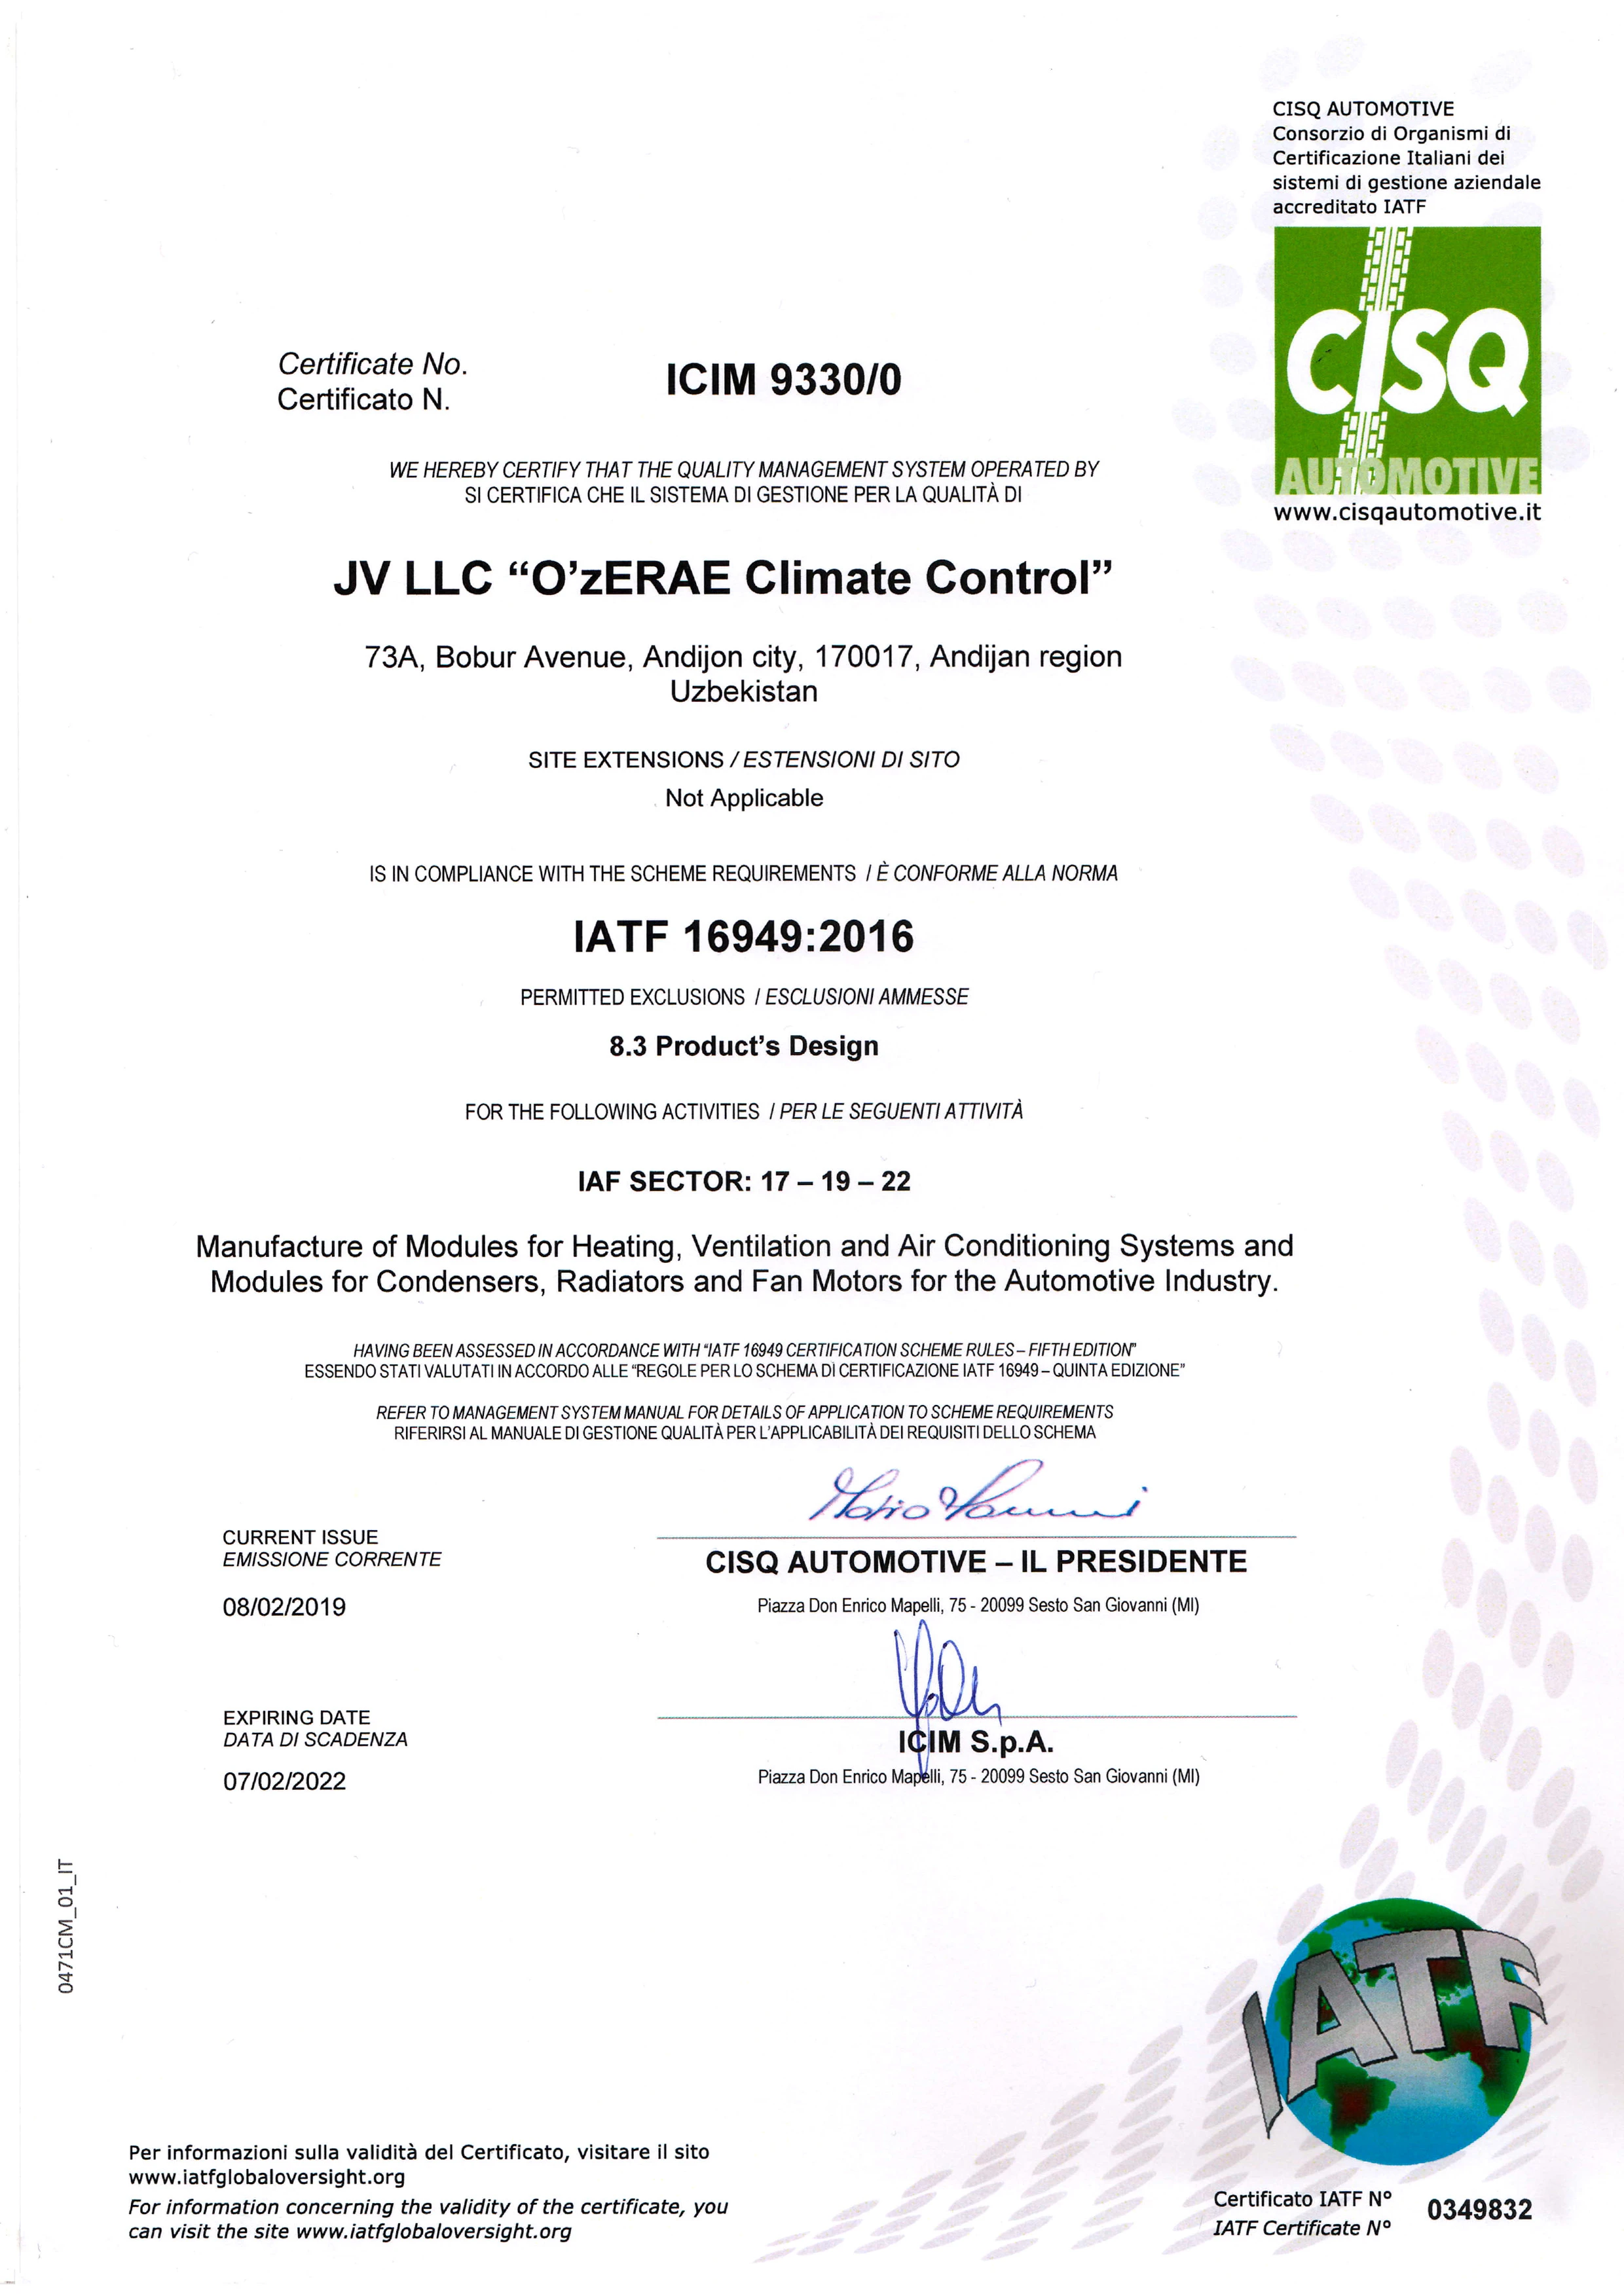 JV LLC "O'Z ERAE CLIMATE CONTROL" has received an energy management system certificate in accordance with the O'z DSt ISO 50001:2015 standard.